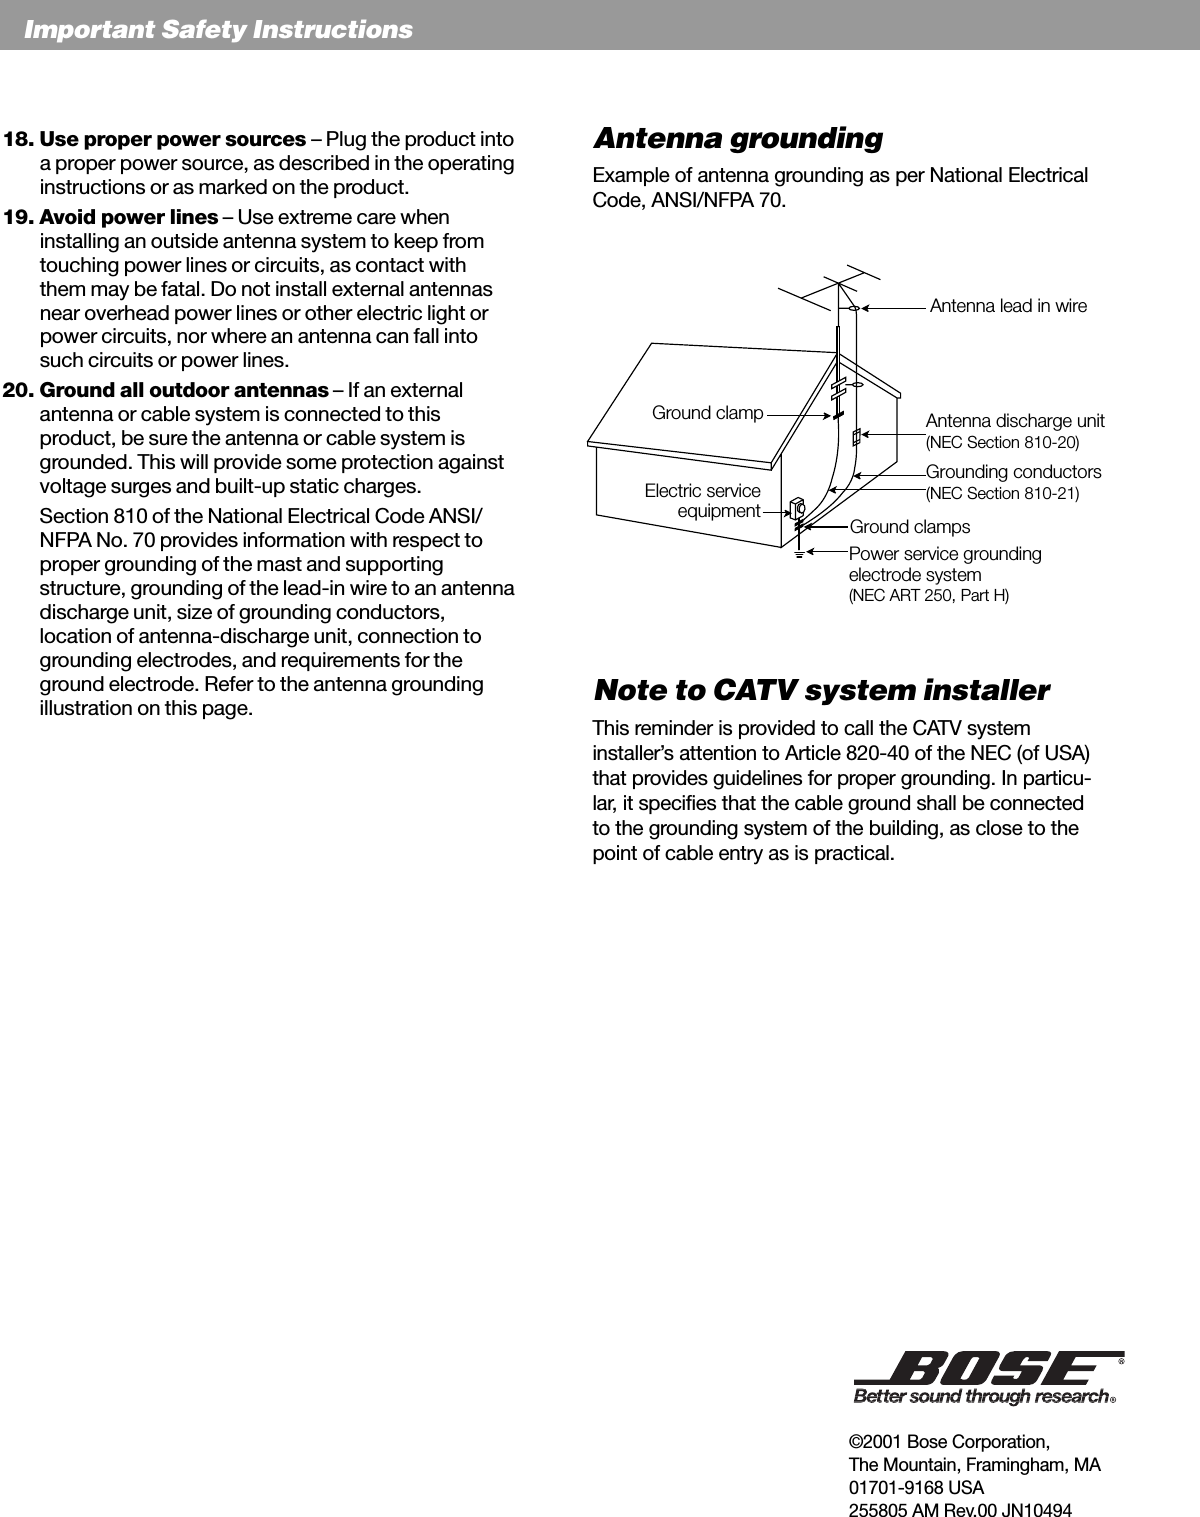 EnglishImportant Safety InstructionsAntenna groundingExample of antenna grounding as per National ElectricalCode, ANSI/NFPA 70.Note to CATV system installerThis reminder is provided to call the CATV systeminstaller’s attention to Article 820-40 of the NEC (of USA)that provides guidelines for proper grounding. In particu-lar, it specifies that the cable ground shall be connectedto the grounding system of the building, as close to thepoint of cable entry as is practical.18. Use proper power sources – Plug the product intoa proper power source, as described in the operatinginstructions or as marked on the product.19. Avoid power lines – Use extreme care wheninstalling an outside antenna system to keep fromtouching power lines or circuits, as contact withthem may be fatal. Do not install external antennasnear overhead power lines or other electric light orpower circuits, nor where an antenna can fall intosuch circuits or power lines.20. Ground all outdoor antennas – If an externalantenna or cable system is connected to thisproduct, be sure the antenna or cable system isgrounded. This will provide some protection againstvoltage surges and built-up static charges.Section 810 of the National Electrical Code ANSI/NFPA No. 70 provides information with respect toproper grounding of the mast and supportingstructure, grounding of the lead-in wire to an antennadischarge unit, size of grounding conductors,location of antenna-discharge unit, connection togrounding electrodes, and requirements for theground electrode. Refer to the antenna groundingillustration on this page.Antenna lead in wireAntenna discharge unit(NEC Section 810-20)Grounding conductors(NEC Section 810-21)Power service groundingelectrode system(NEC ART 250, Part H)Ground clampsGround clampElectric serviceequipment©2001 Bose Corporation,The Mountain, Framingham, MA01701-9168 USA255805 AM Rev.00 JN10494